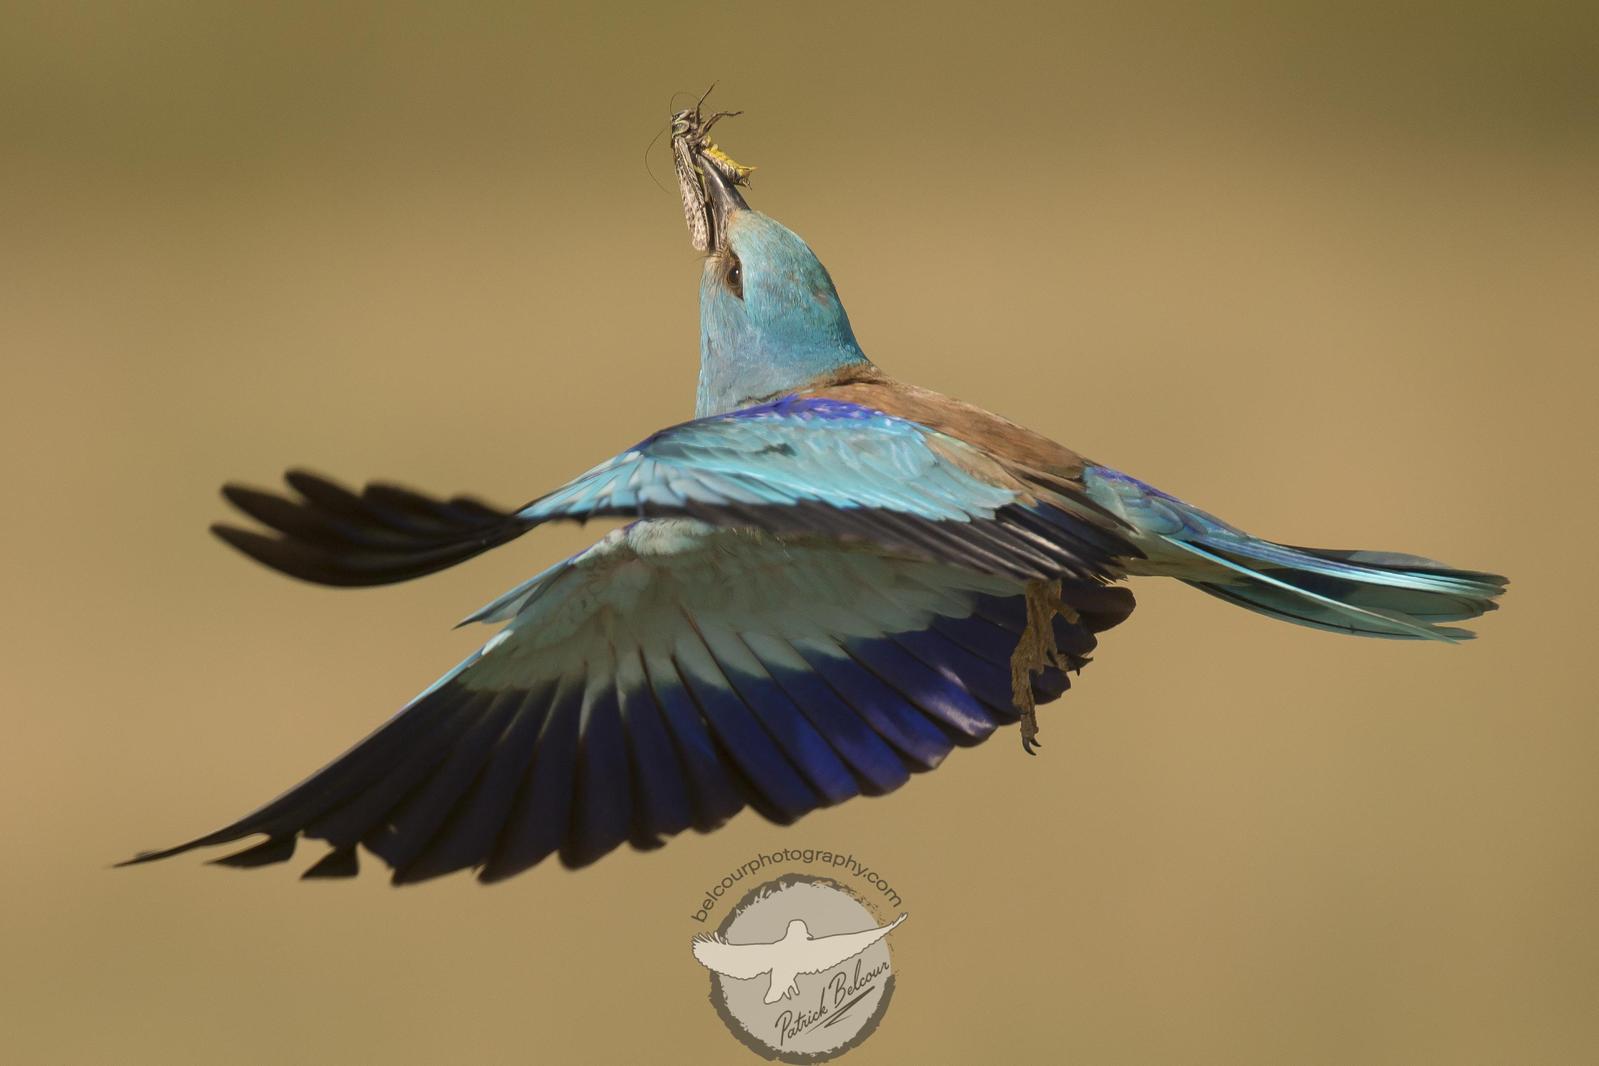 European/Indian Roller Photo by PATRICK BELCOUR